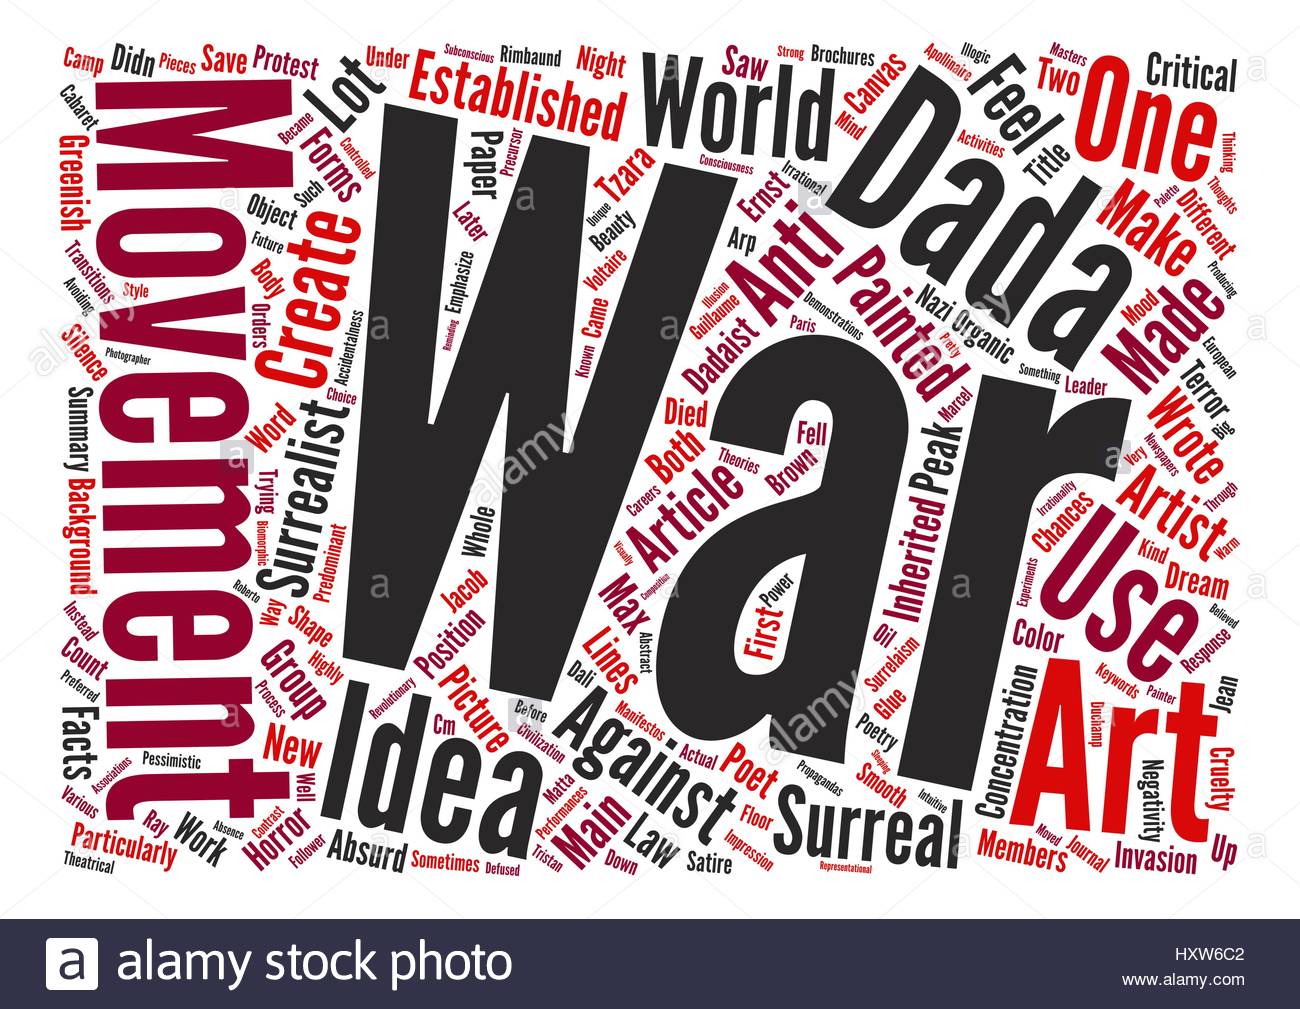 Dada As A Response To The Horrors Of War Word Cloud Concept Text